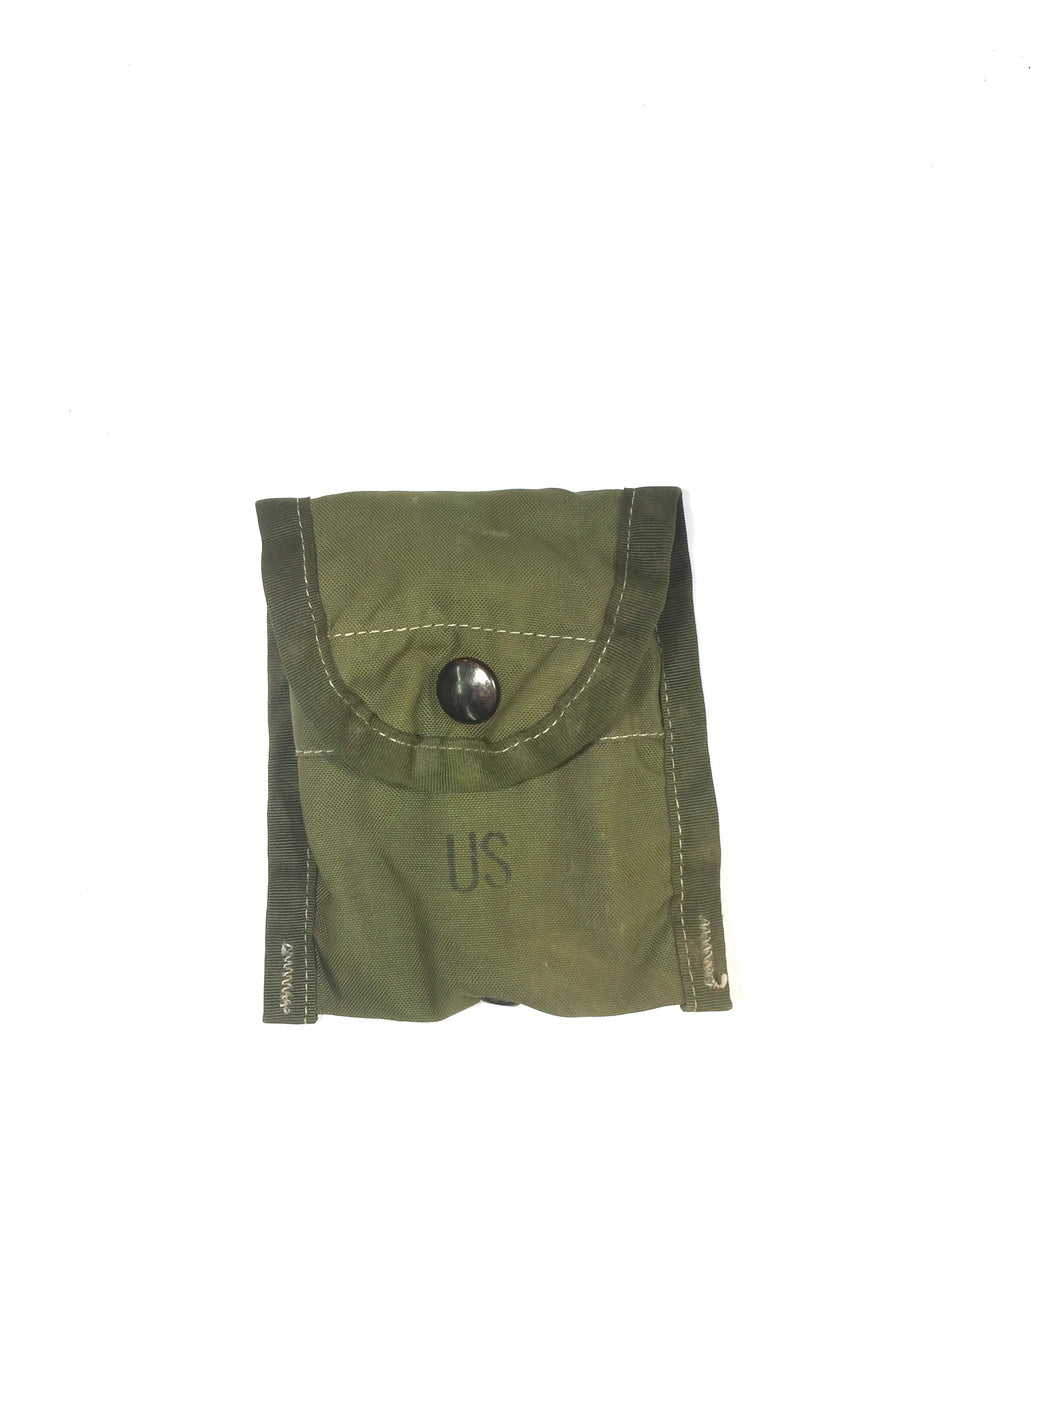 Alice LC-1 Compass/Dressing Pouch